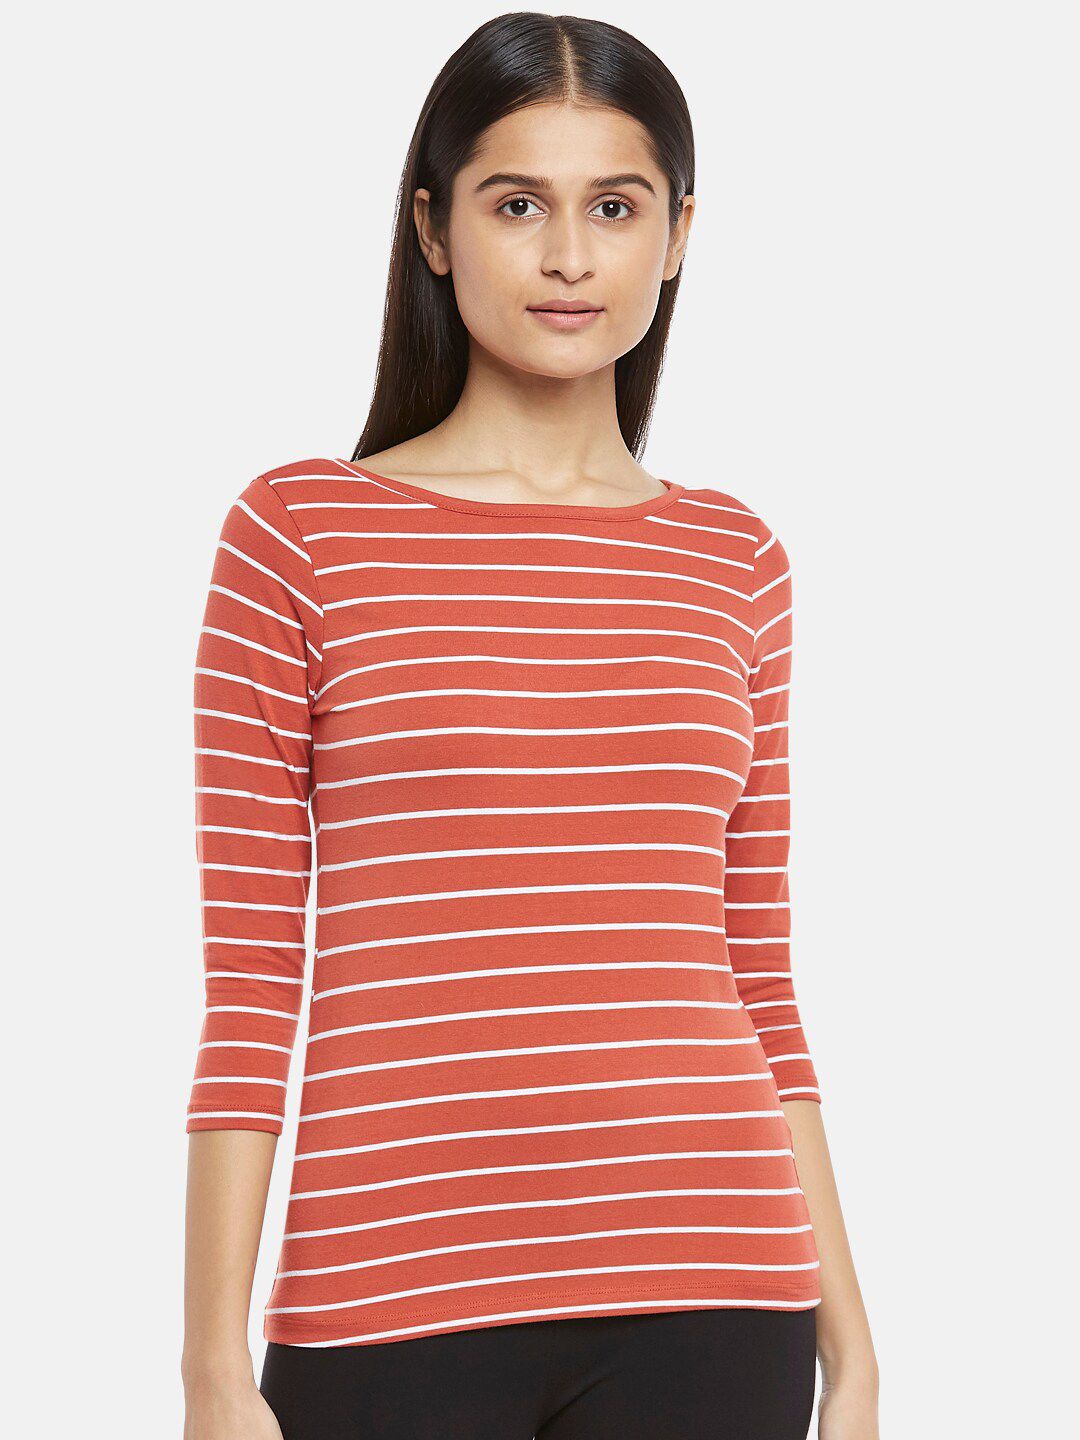 Dreamz by Pantaloons Rust Striped Regular Lounge tshirt Price in India